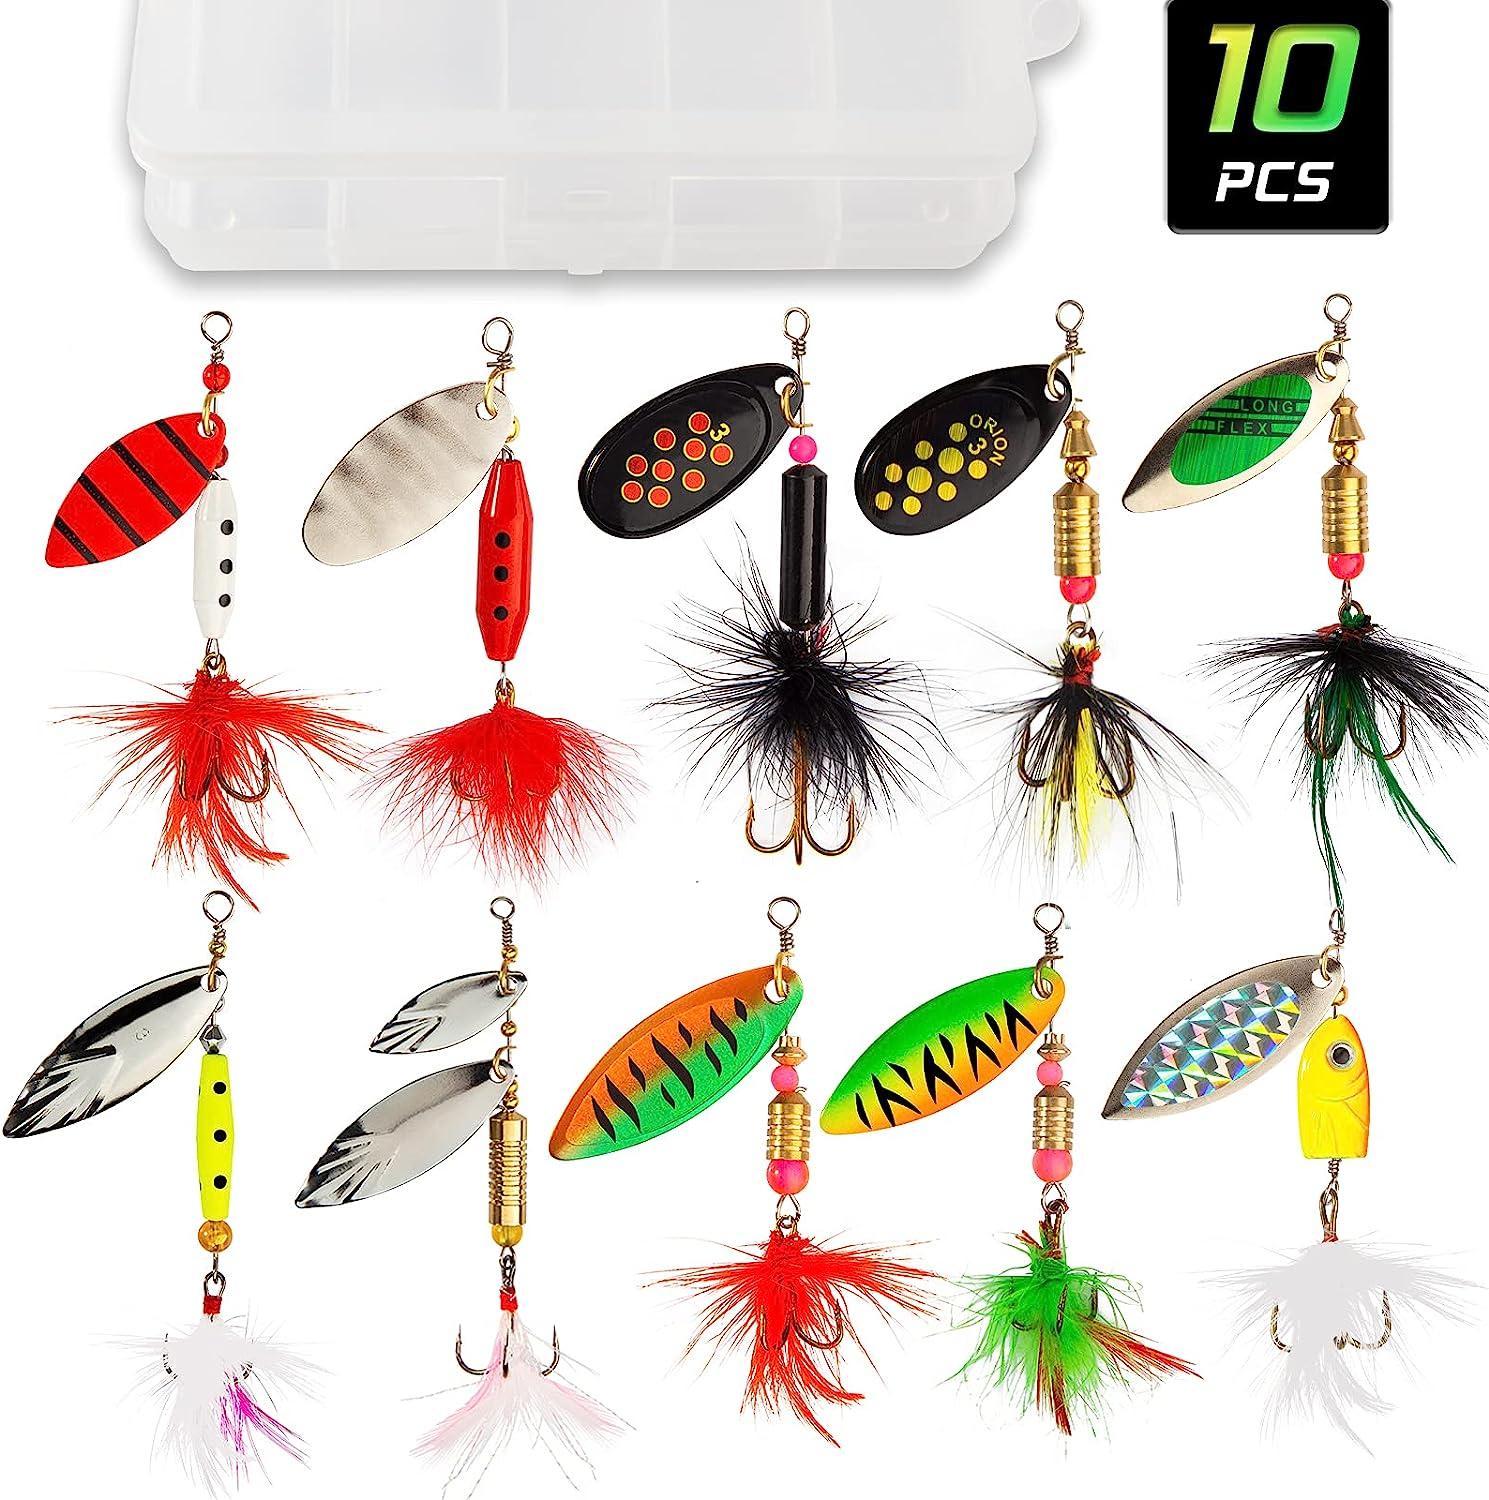 Akataka Spinnerbaits 10Pcs w/ Tackle Box, Colorful Hard Metal Baits Fishing  Lure Kit Set w/ Bass Trout Salmon Walleye, Freshwater & Saltwater Fishing  Lure, IDAL for Begginners and Experienced Style E